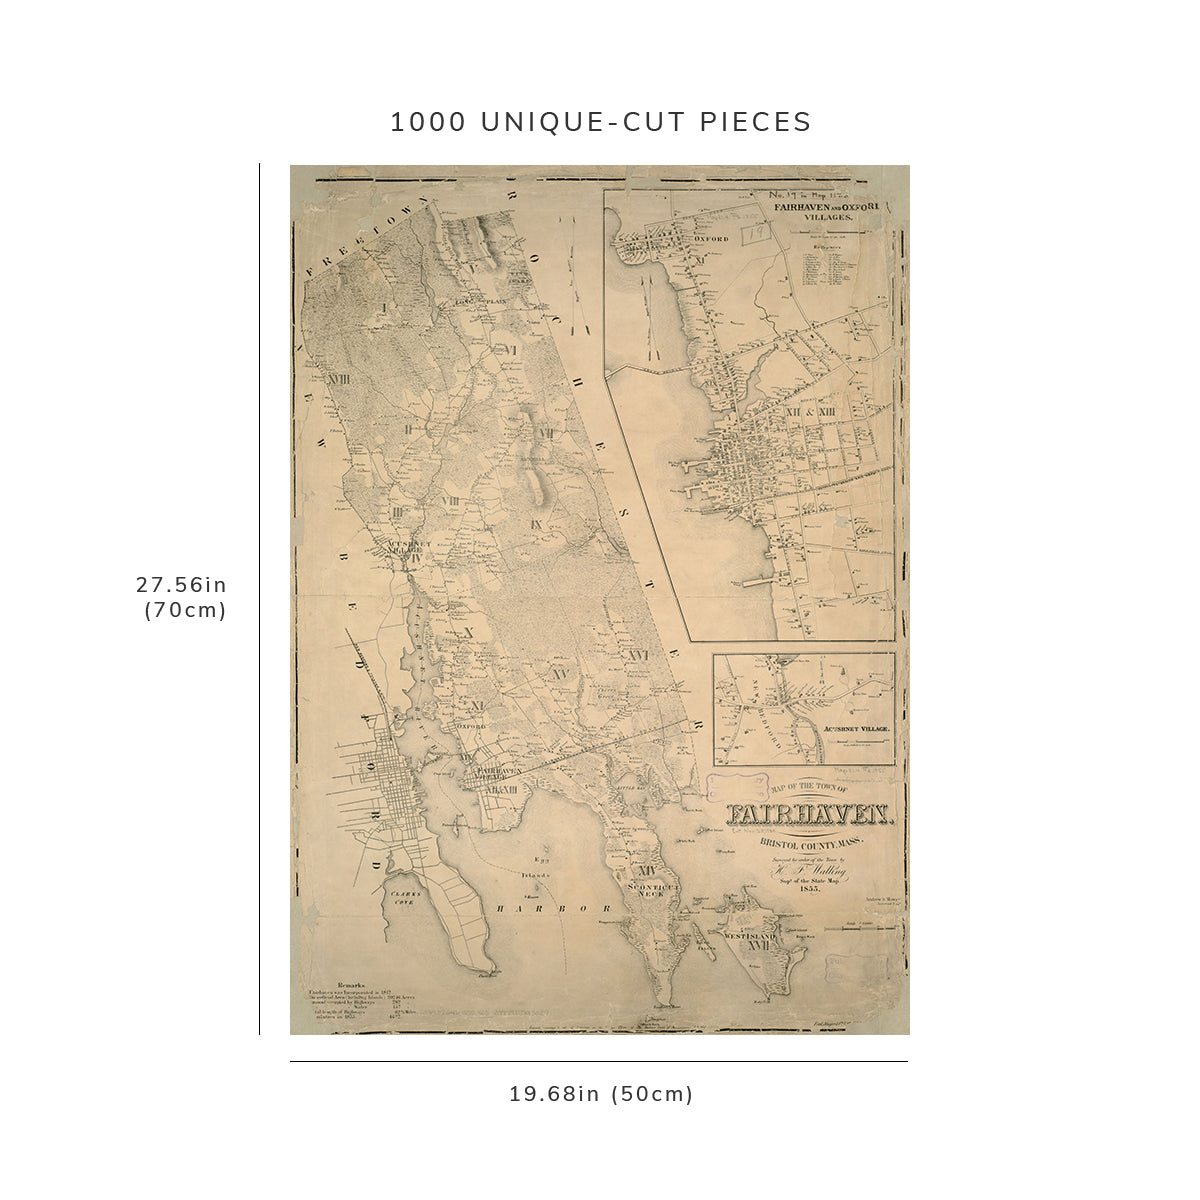 1000 Piece Jigsaw Puzzle: 1855 Map | Bristol | Acushnet of the town of Fairhaven, Bristo